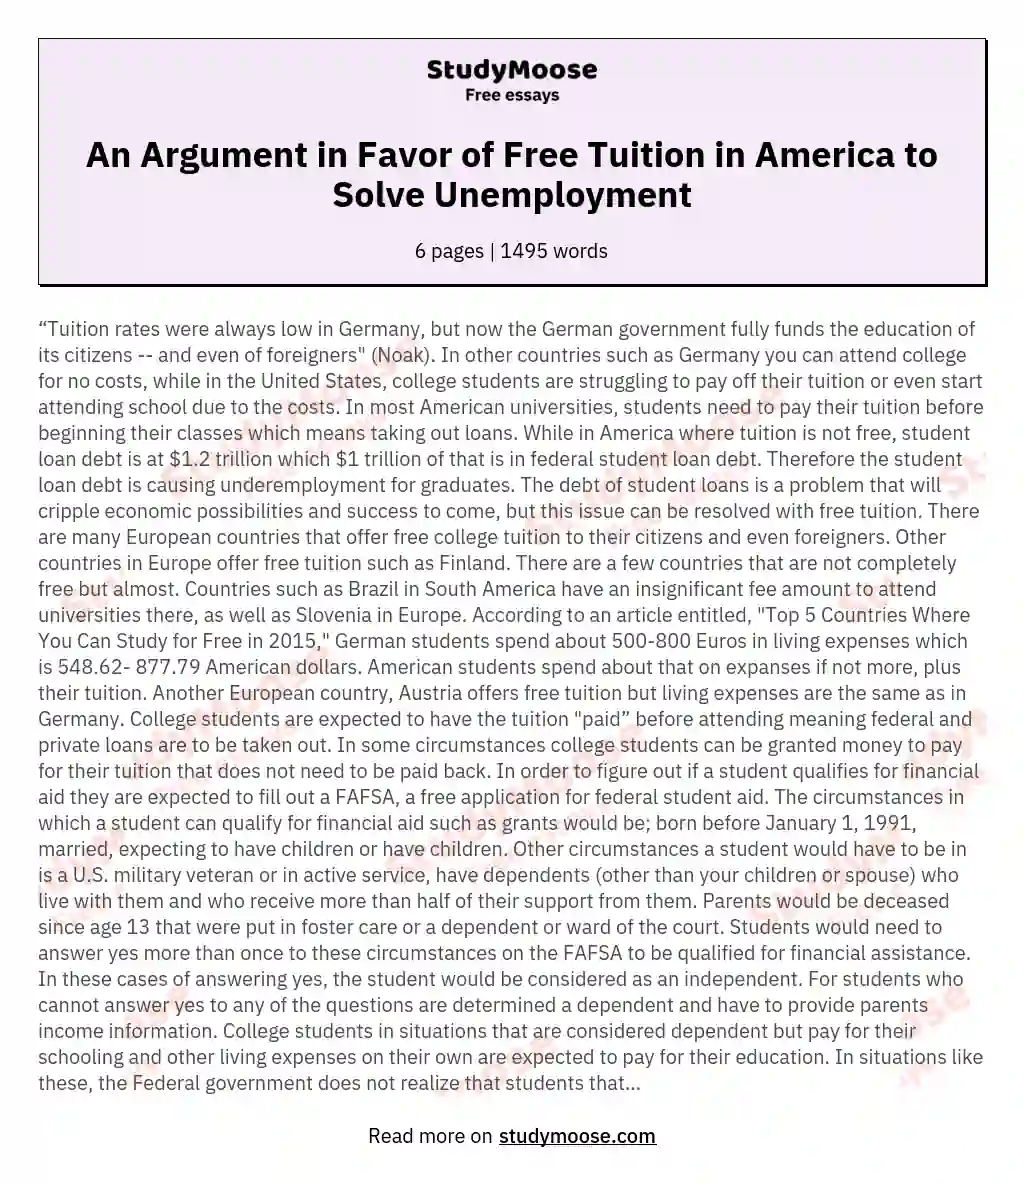 An Argument in Favor of Free Tuition in America to Solve Unemployment